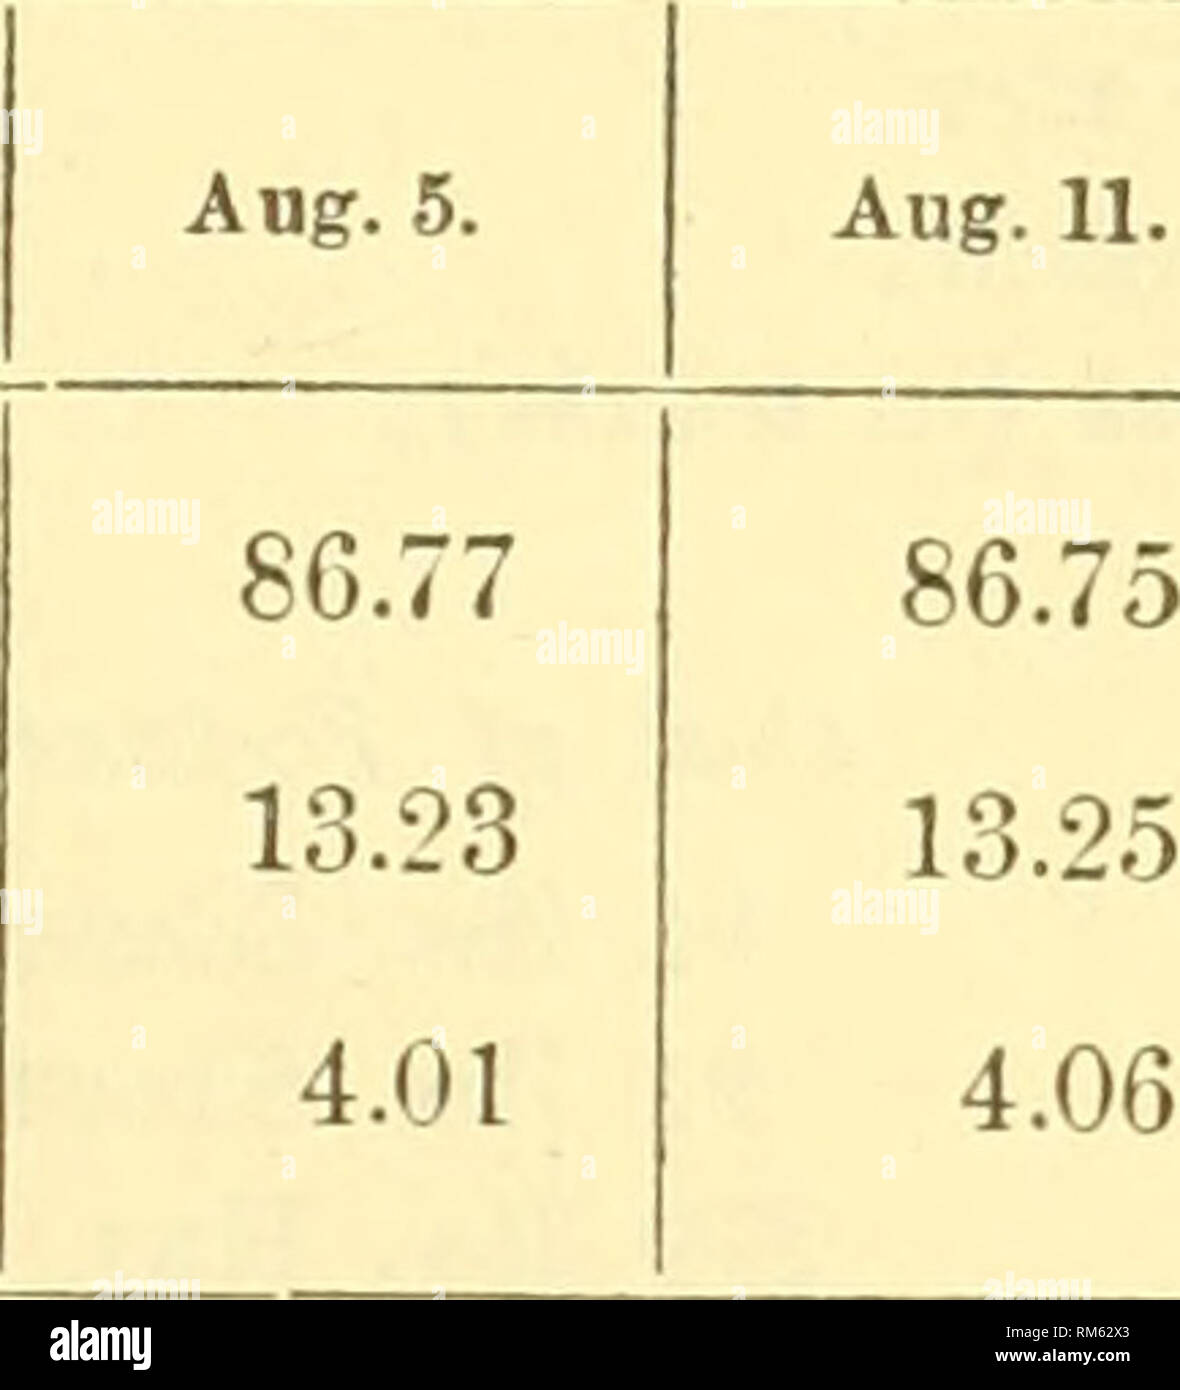 . Annual report of the Board of Control of the State Agricultural Experiment Station at Amherst, Mass. Agriculture -- Massachusetts Periodicals. Experiment Station lieport. 49 Analyses of Milk. Aug. 11.. Water, . Solids, . Fat (in solids). Cost of Fodder consumed during the 2d Feeding Period. 182 lbs. Gluten Meal $2 04 91 lbs. Shorts, 1 05 556 lbs. Hay, 4 17 Total, 829 lbs $7 26 Cost of fodder per day. Average produce of milk per day. Cost of fodder per quart of milk, . 25 93 cents. 15.9 lbs., or 7 95 quarts. 3.38 cents. Record of Nellie May — Co.ntinued. Feed Consumed (lbs.) per DAT. Milk Pro Stock Photo